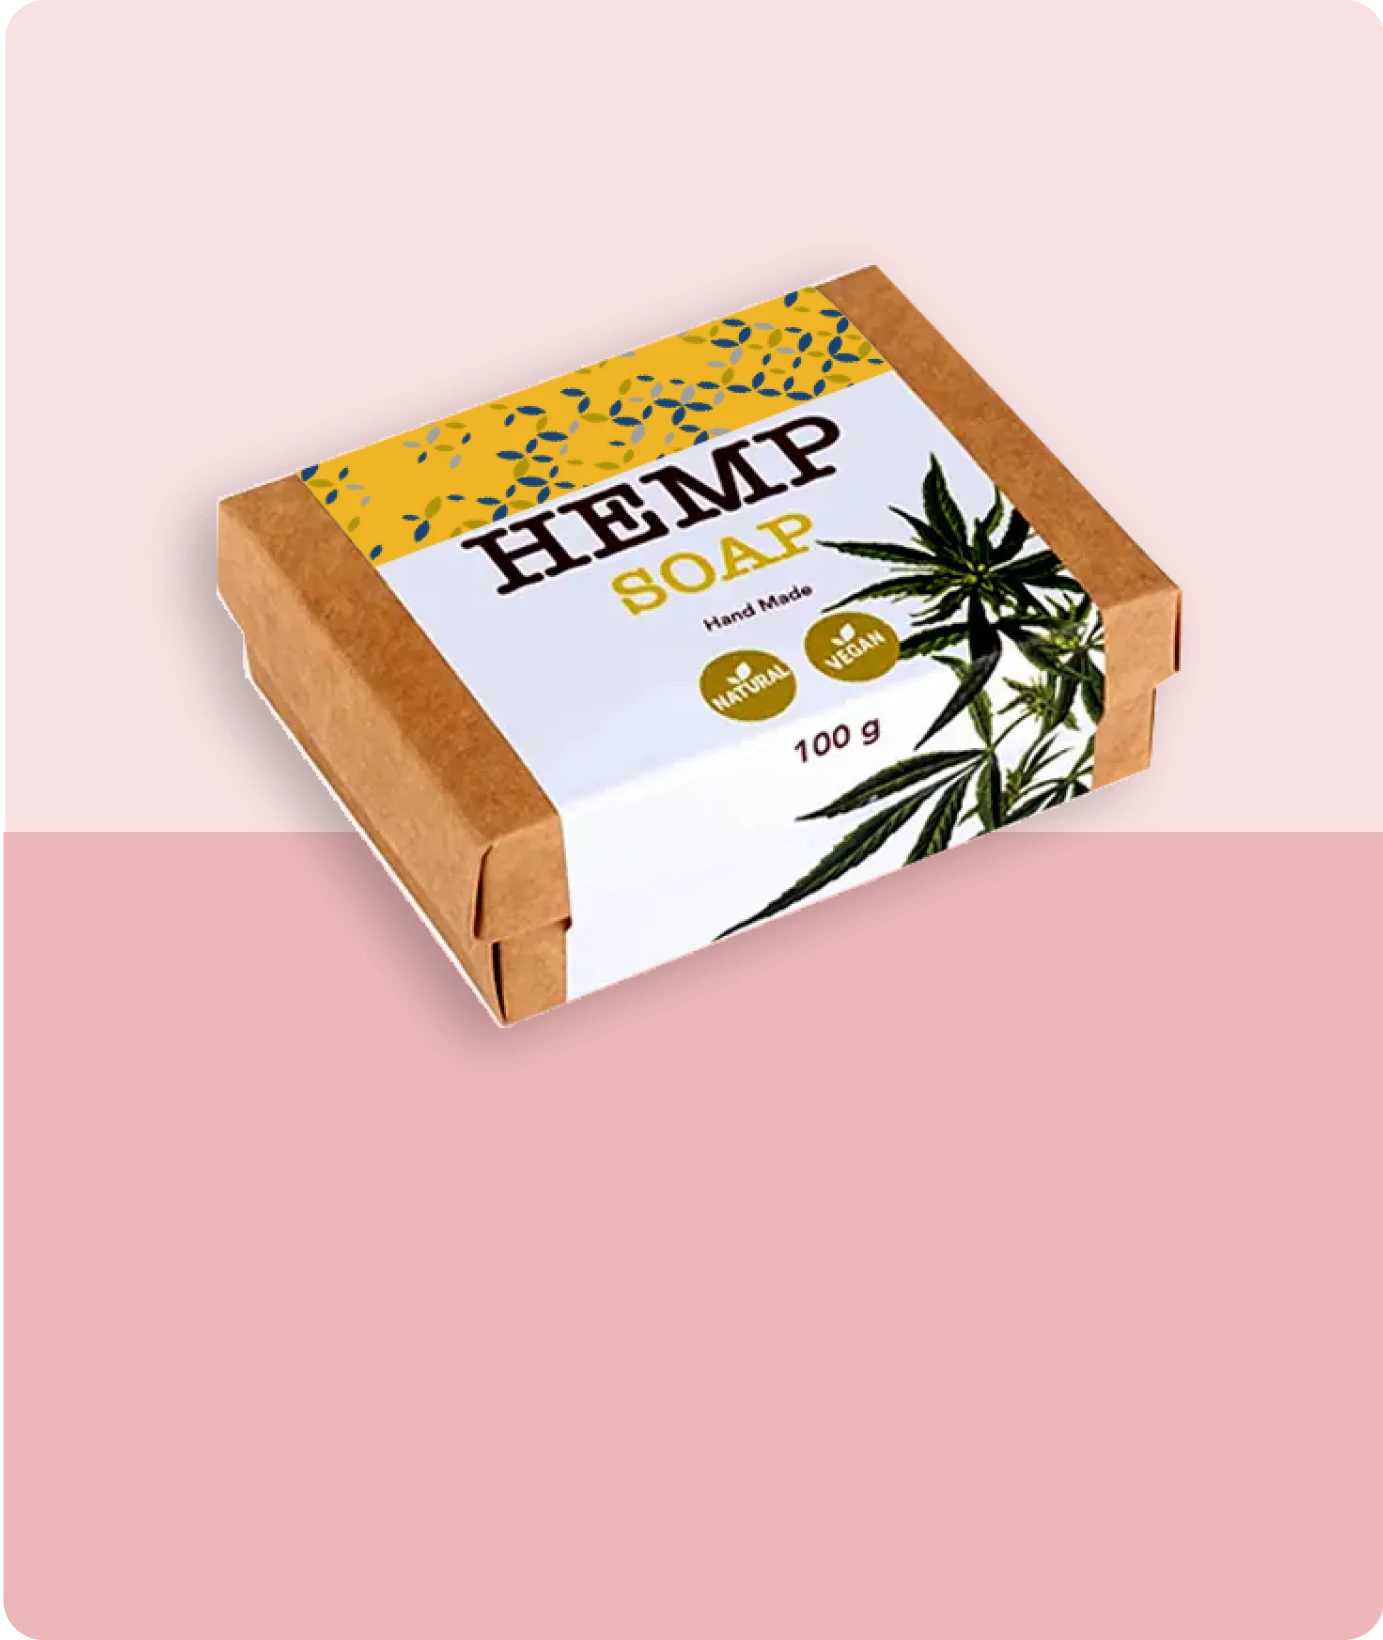 Hemp Paper Boxes related products image | The Box Lane